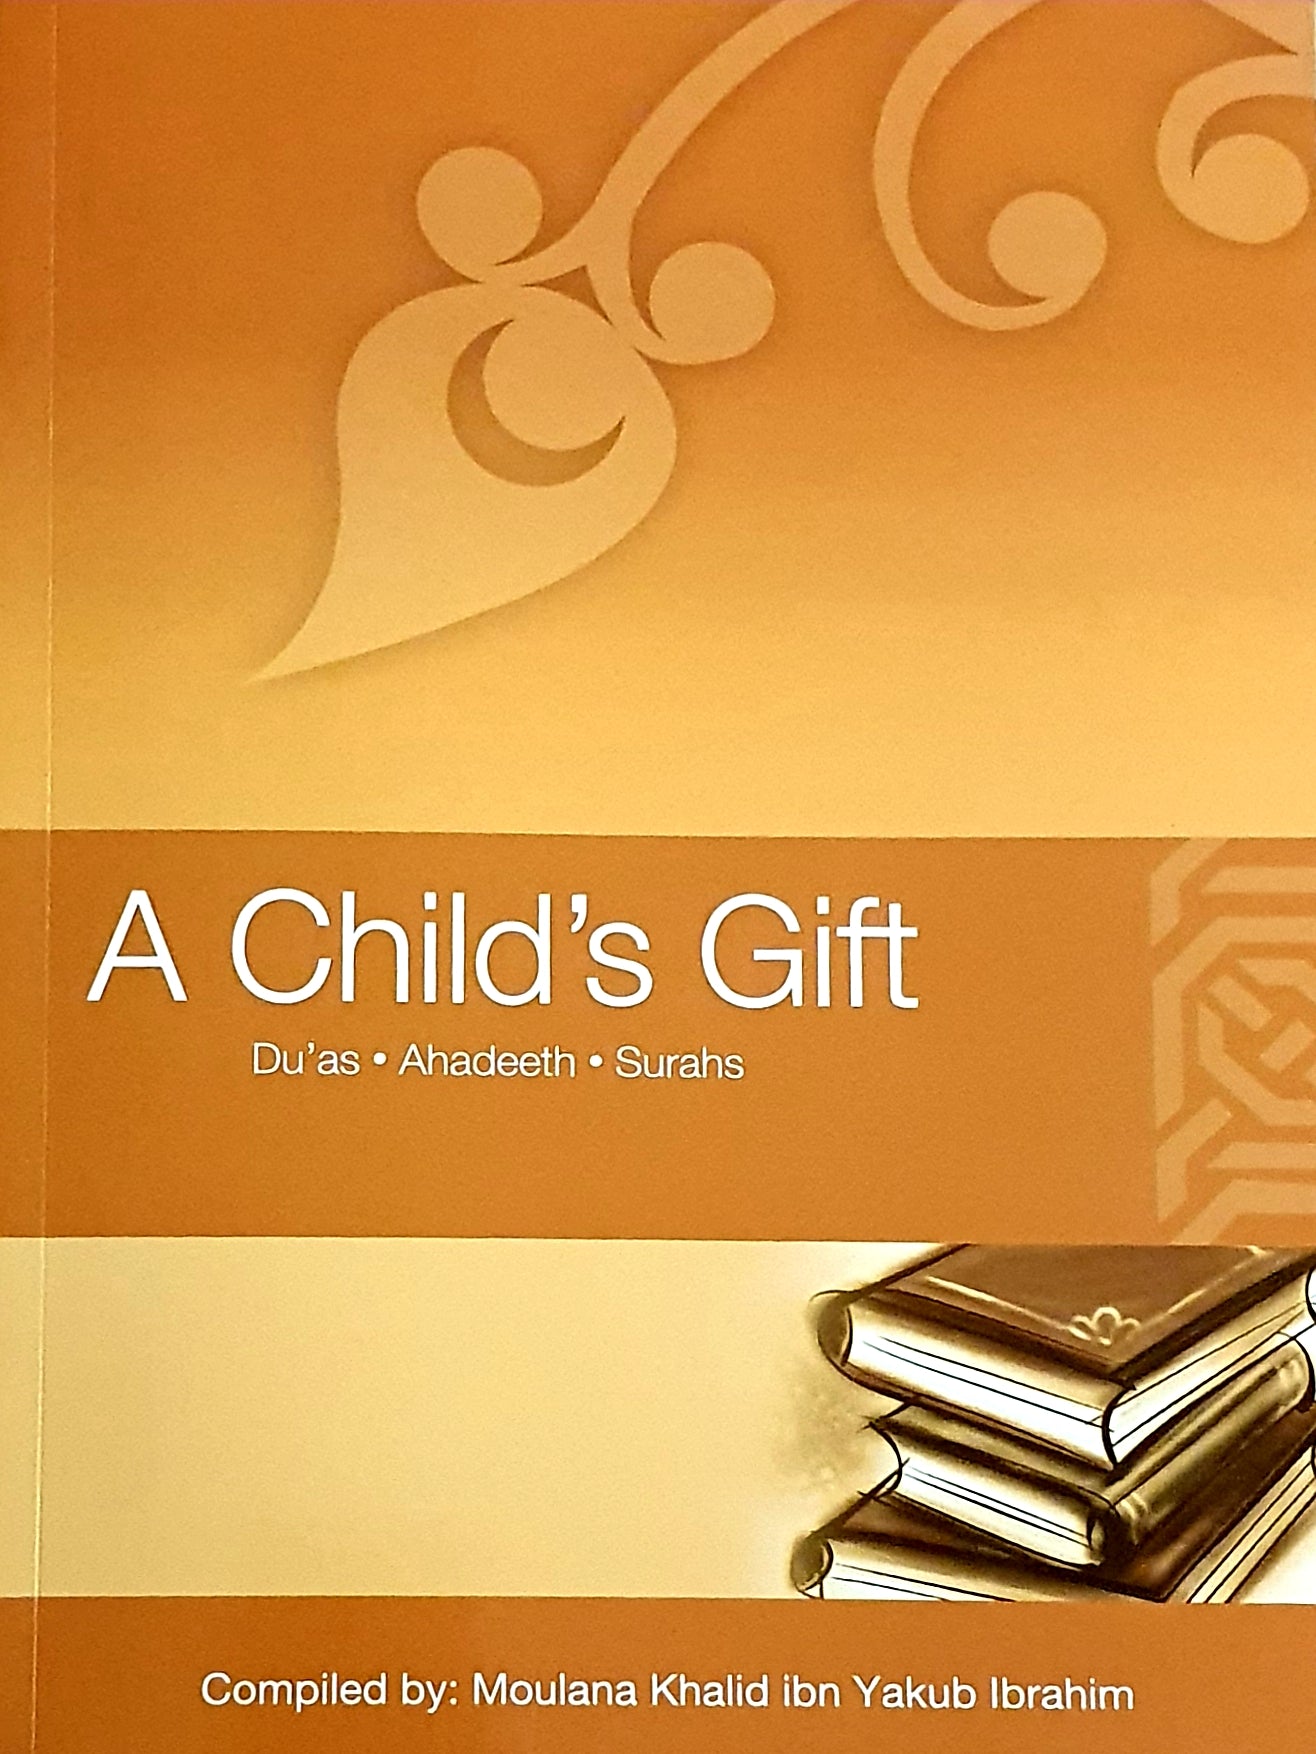 A Childs Gift